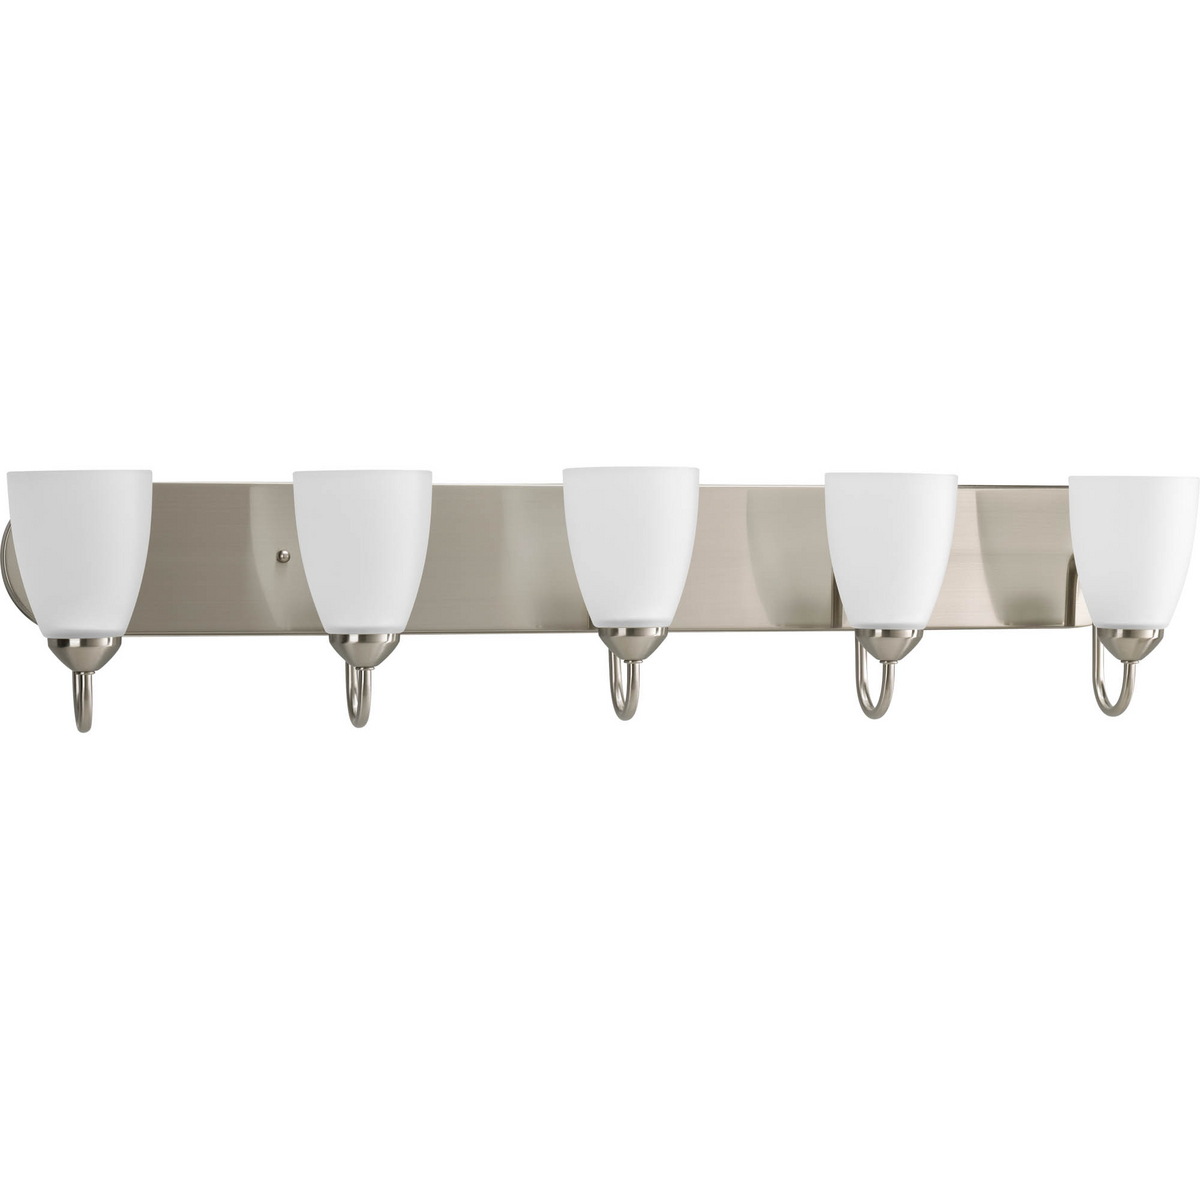 Gather possesses a smart simplicity to complement today's home. This five-light bath bracket contains etched glass shades which add distinction and provide pleasing illumination to your room. Featuring a glamorous Brushed Nickel finished frame, this collection allows you to decorate an entire home with confidence and style.